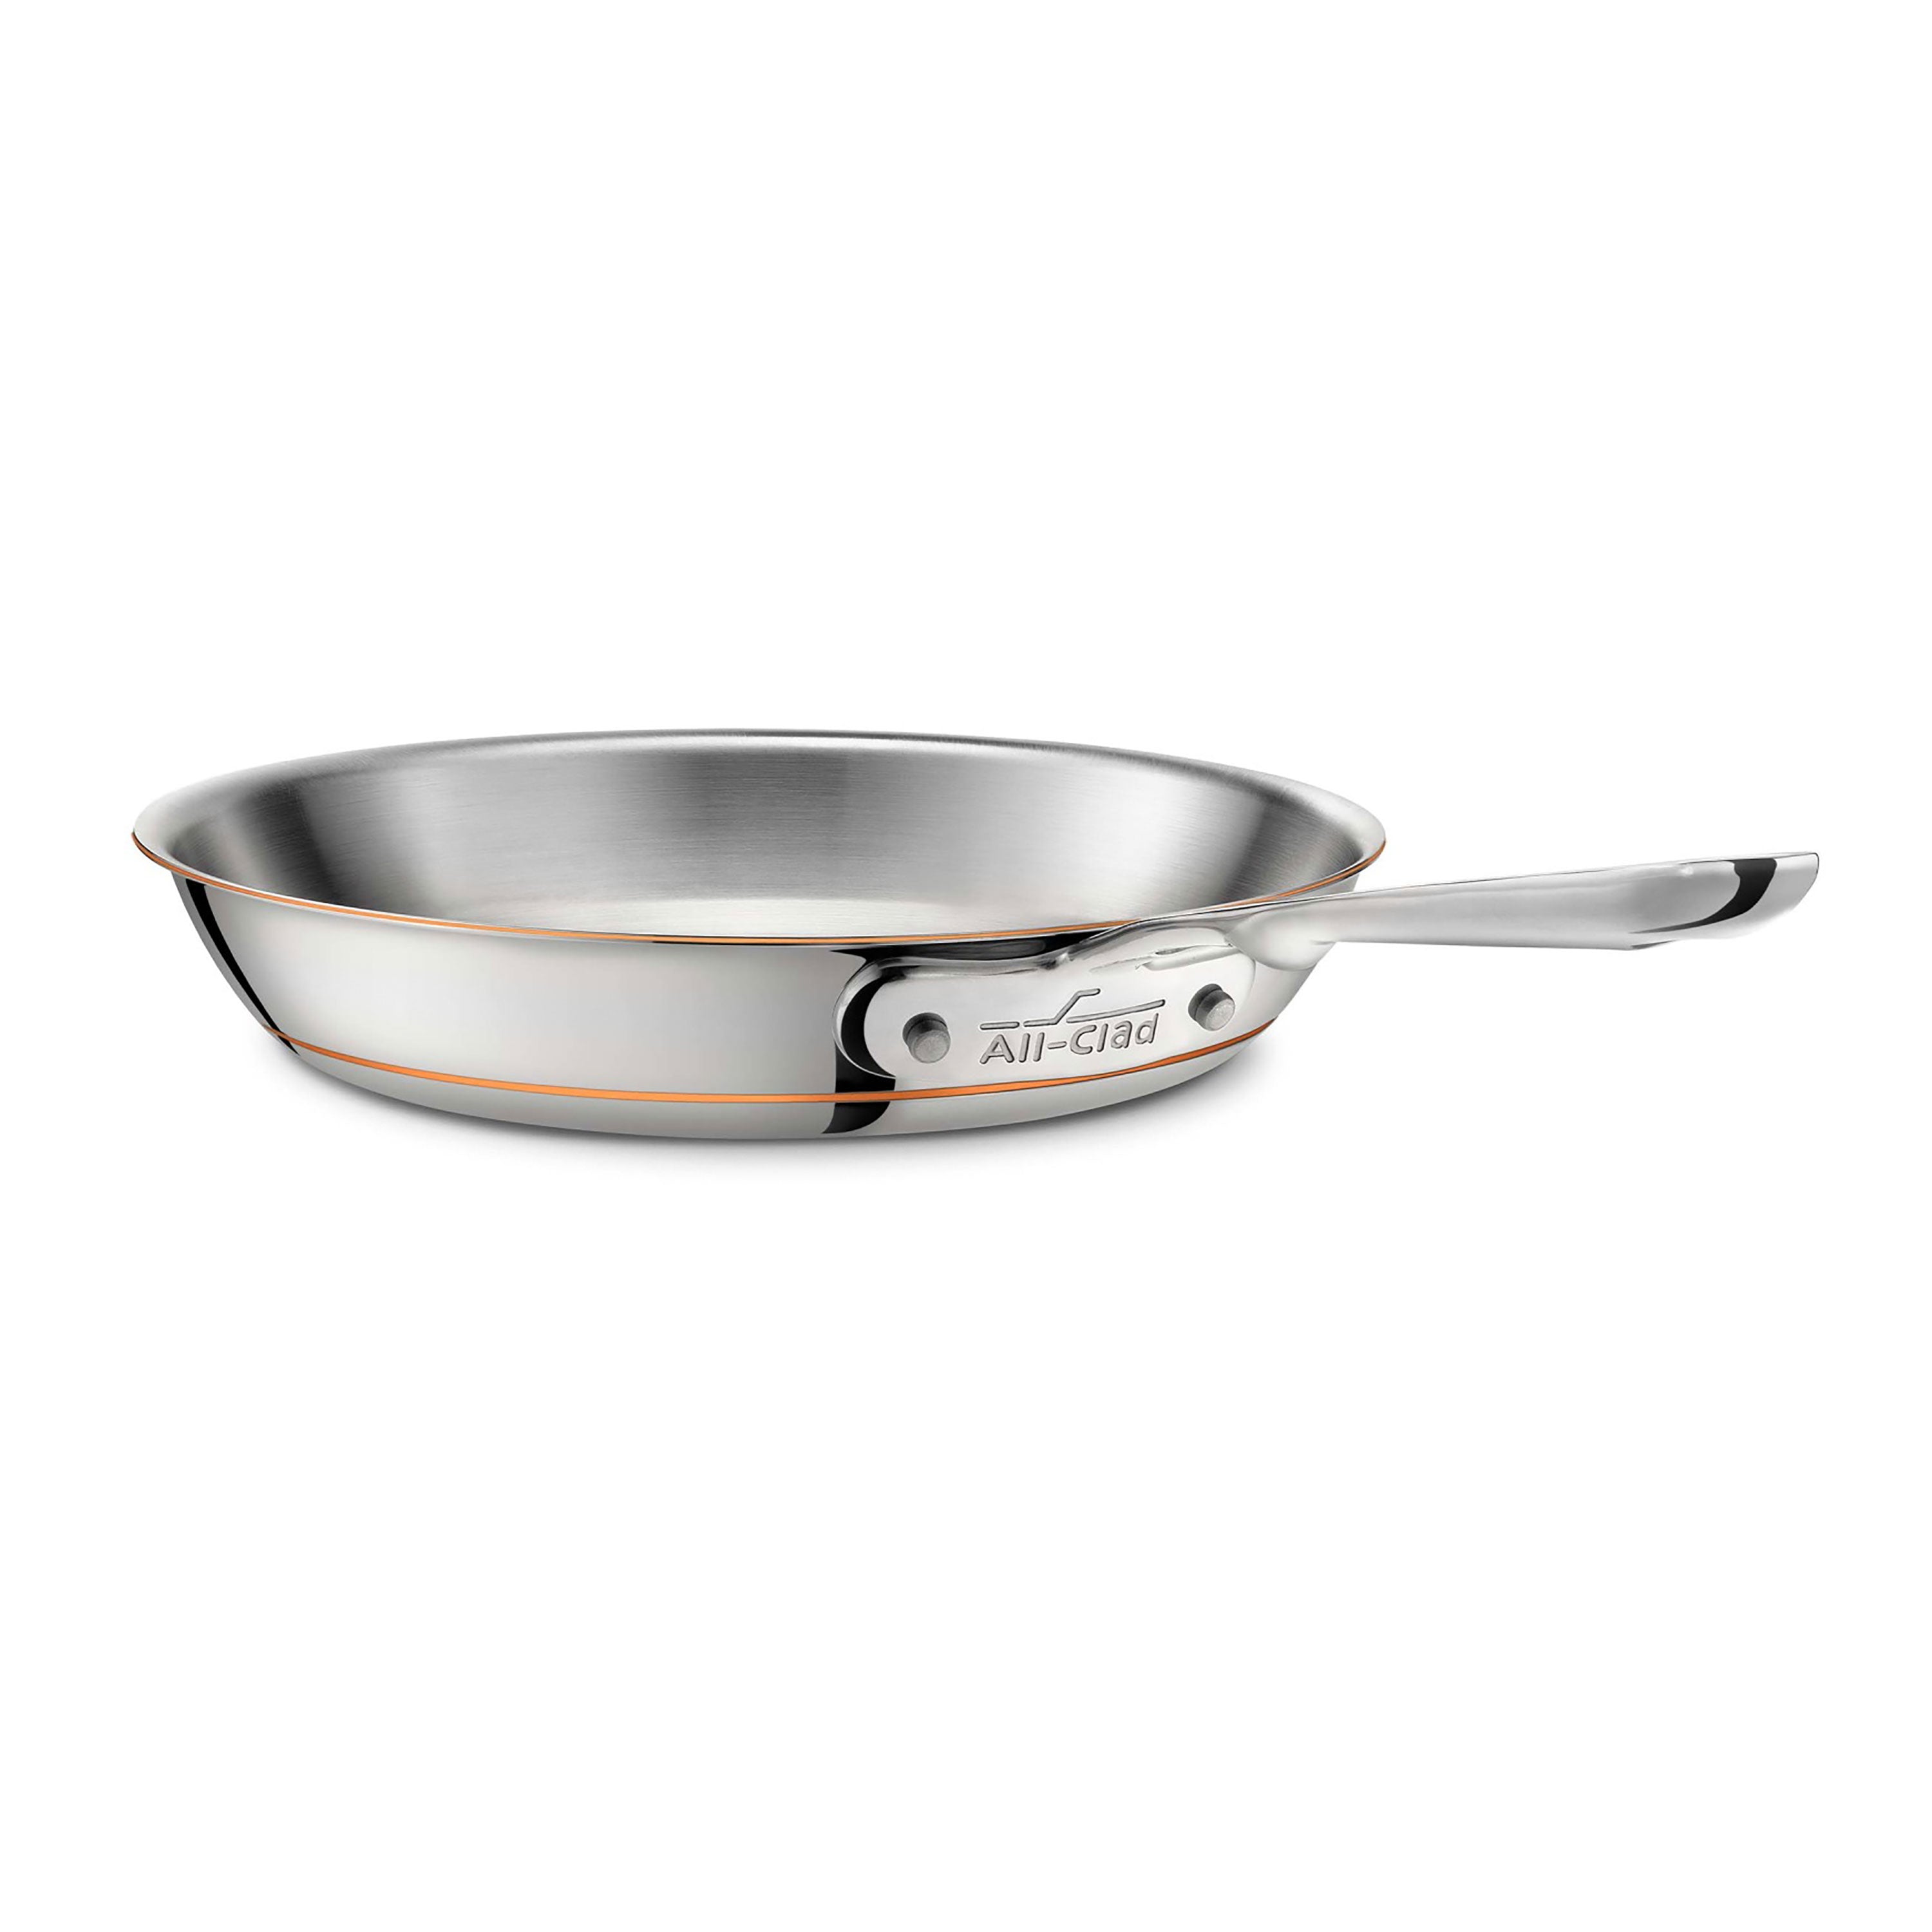 In-Depth Product Review: All-Clad Copper Core 12-inch skillet